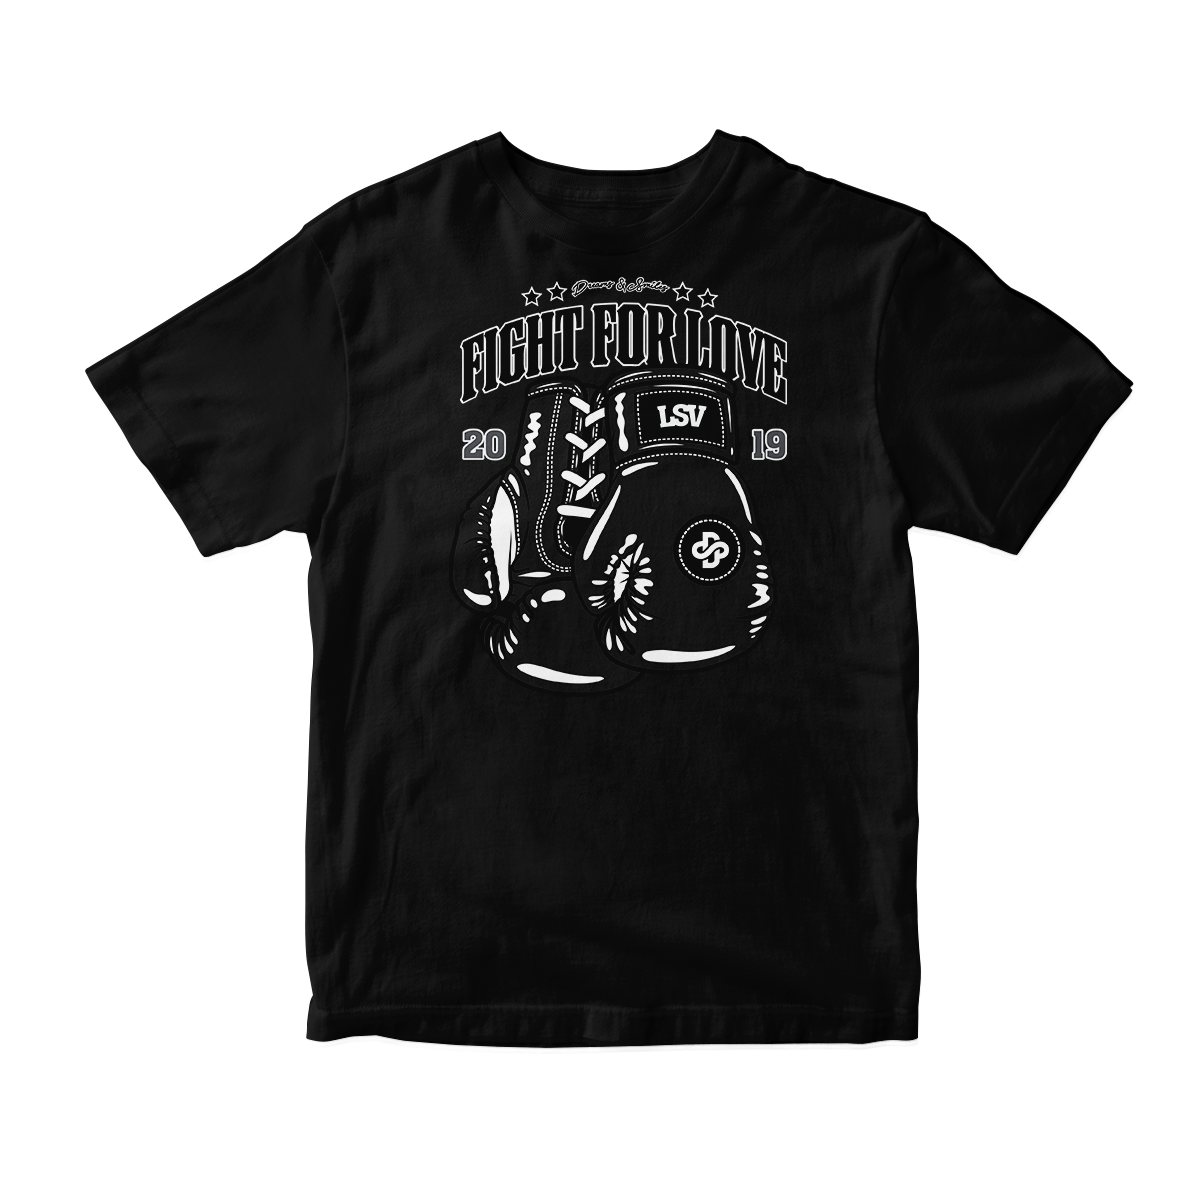 'Fight For Love' in Black Cat CW Short Sleeve Tee